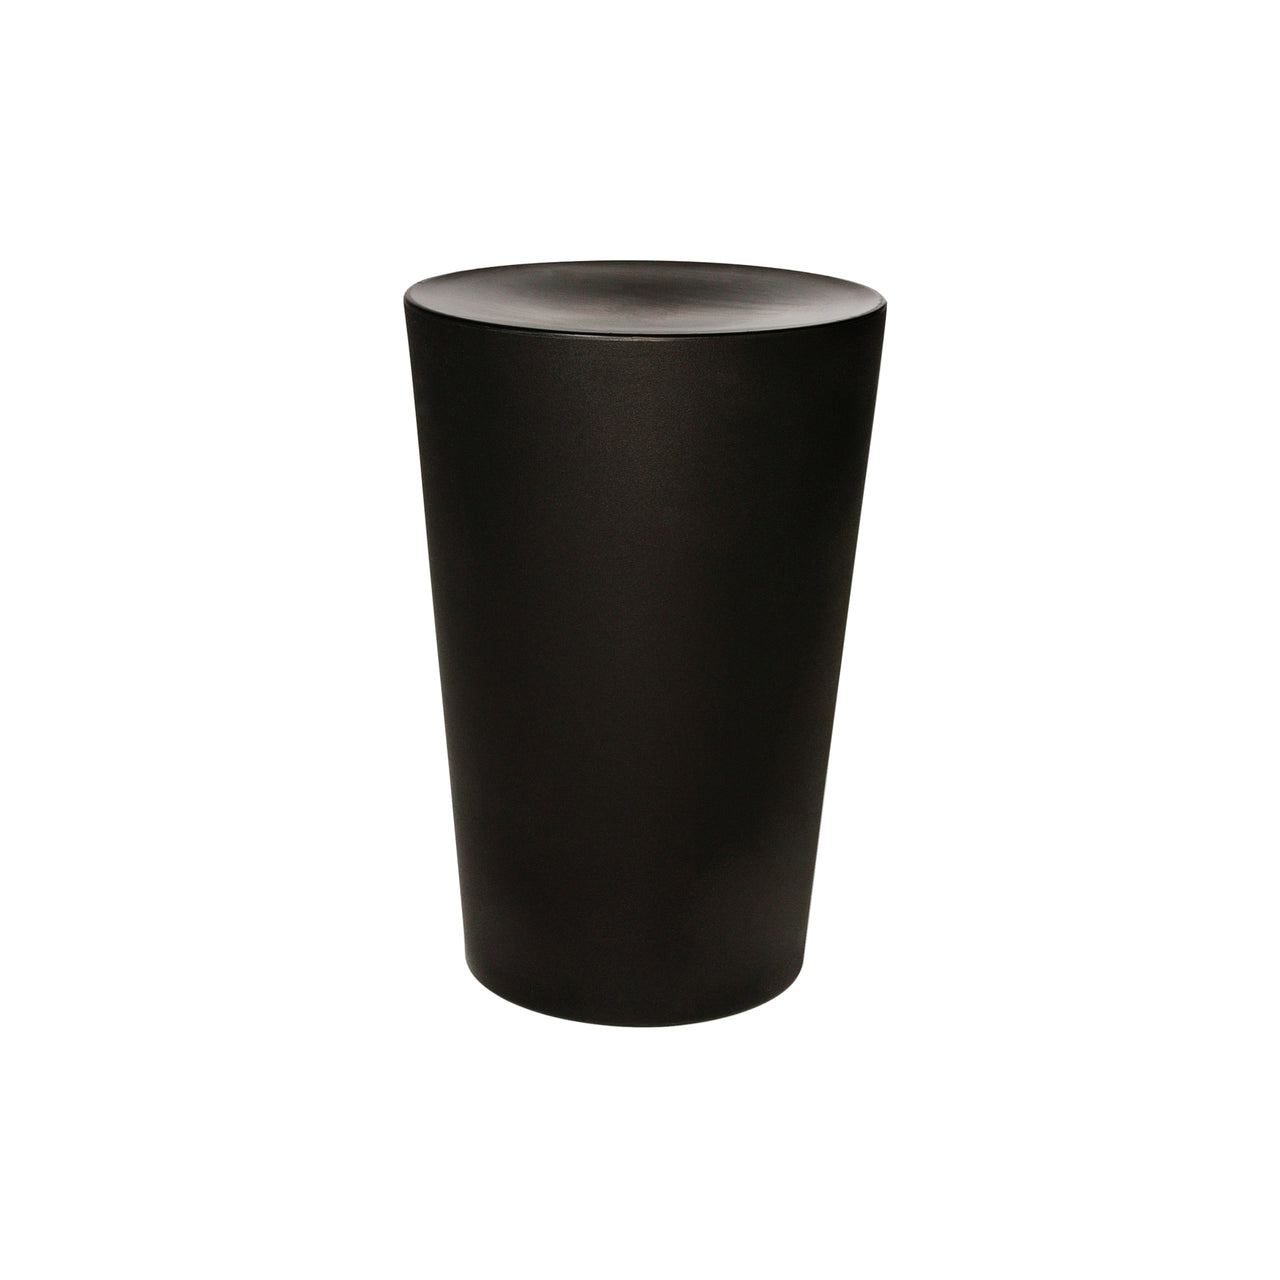 Container Stool: Black